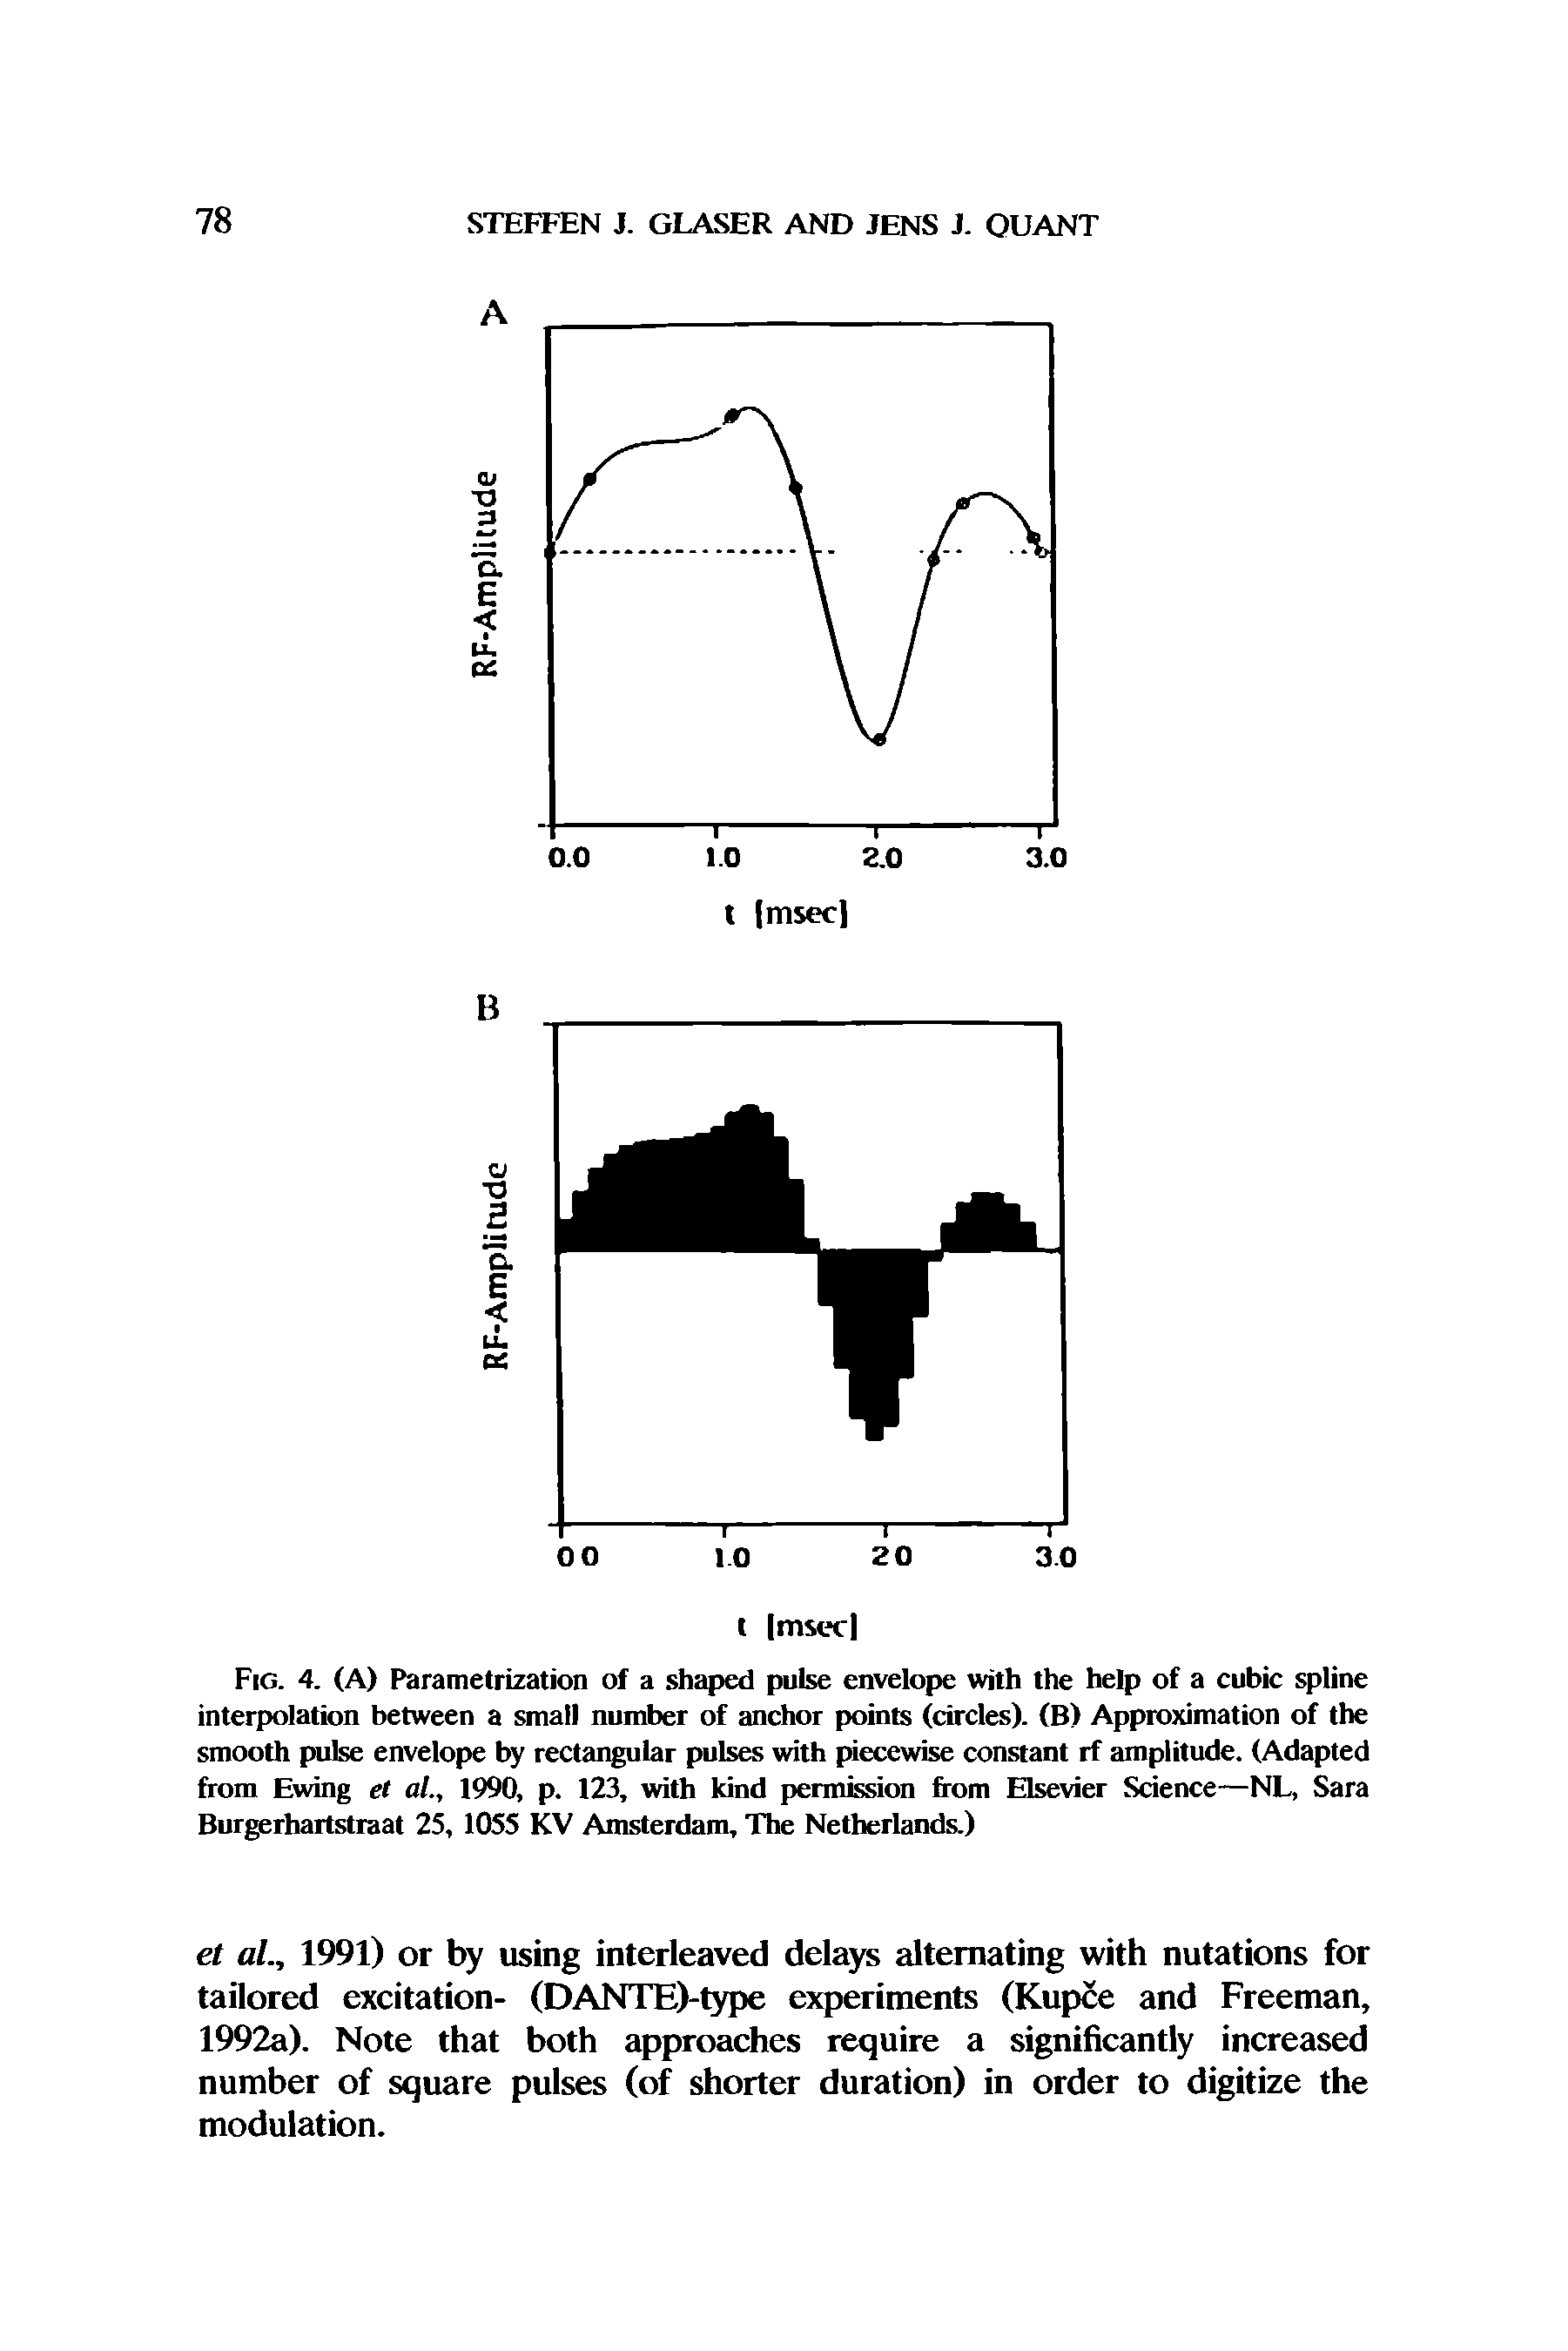 Fig. 4. (A) Parametrization of a shaped pulse envelope with the help of a cubic spline interpolation between a small number of anchor points (circles). (B) Approximation of the smooth pulse envelope by rectangular pulses with piecewise constant rf amplitude. (Adapted from Ewing et al., 1990, p. 123, with kind permission from Elsevier Science—NL, Sara Burgerhartstraat 25, 1055 KV Amsterdam, The Netherlands.)...